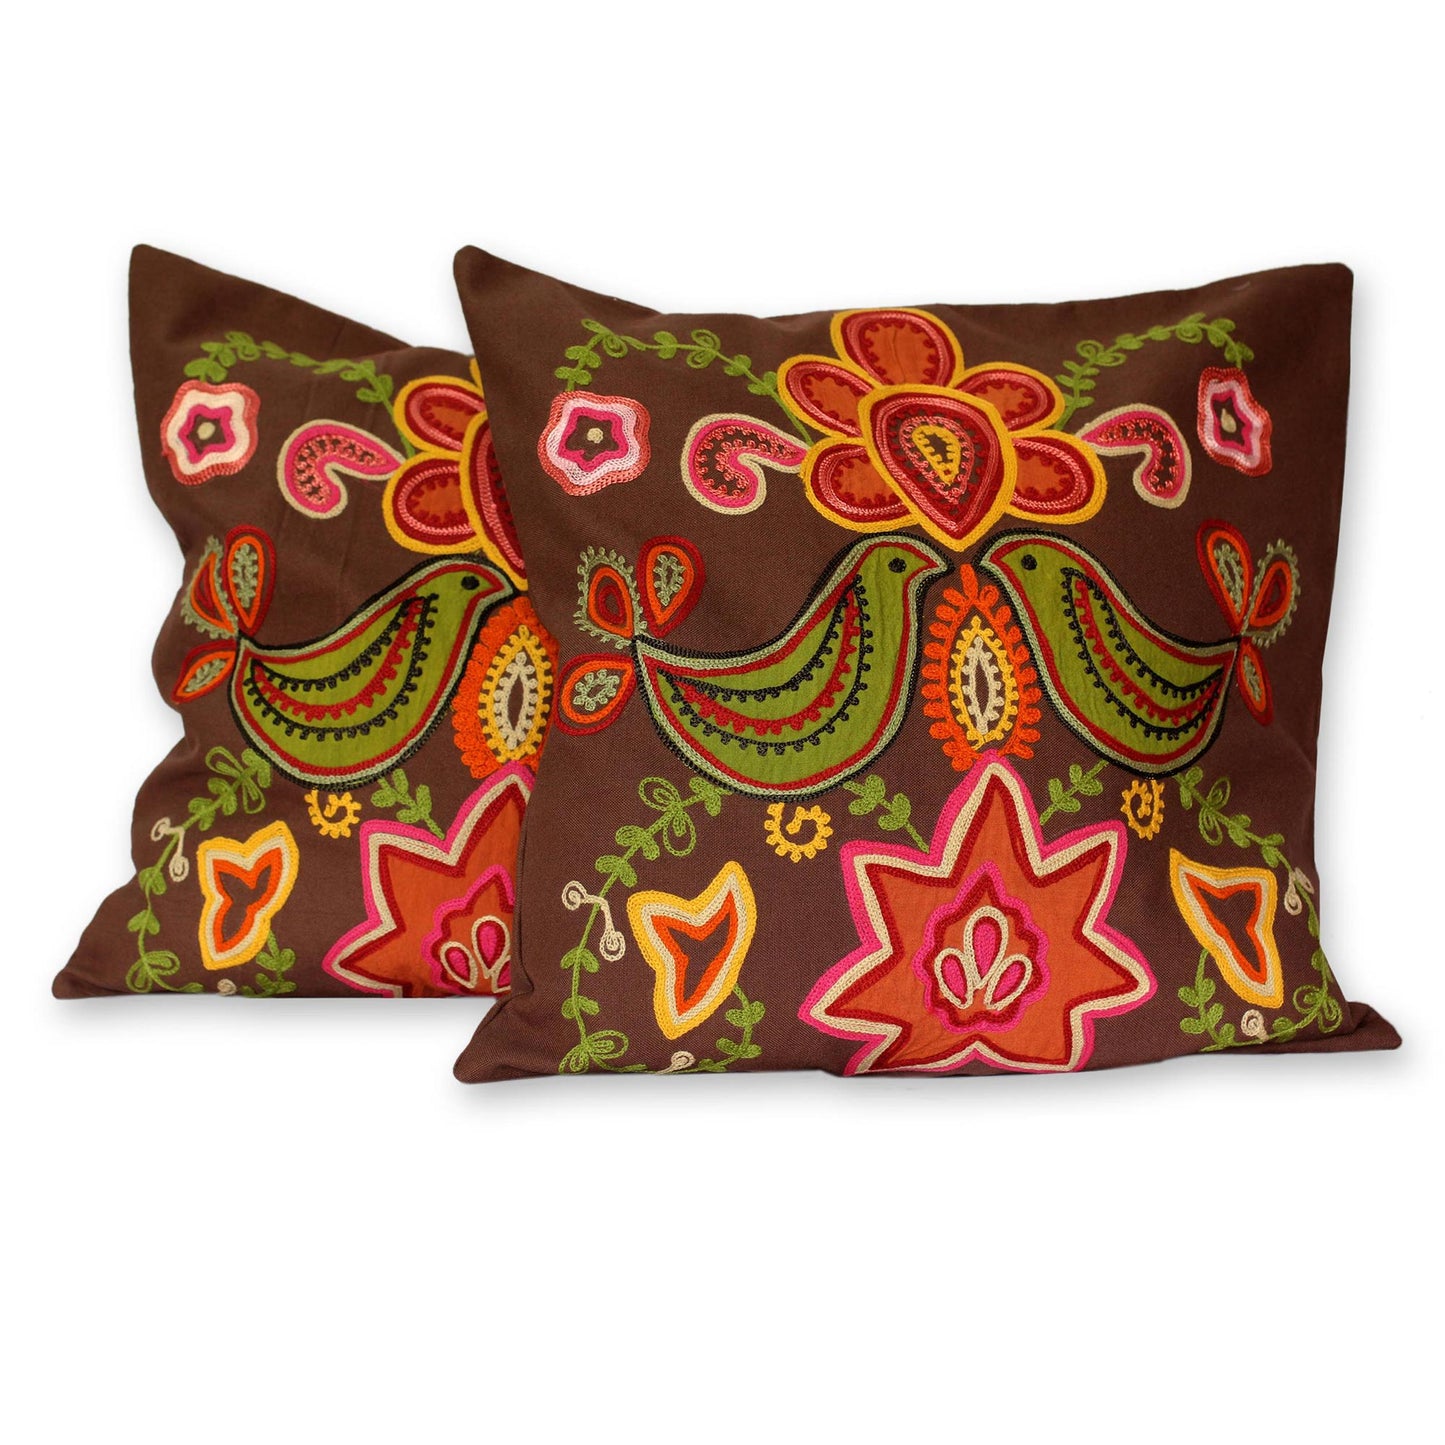 Choral Handmade Indian Floral Cotton Cushion Covers (Pair)